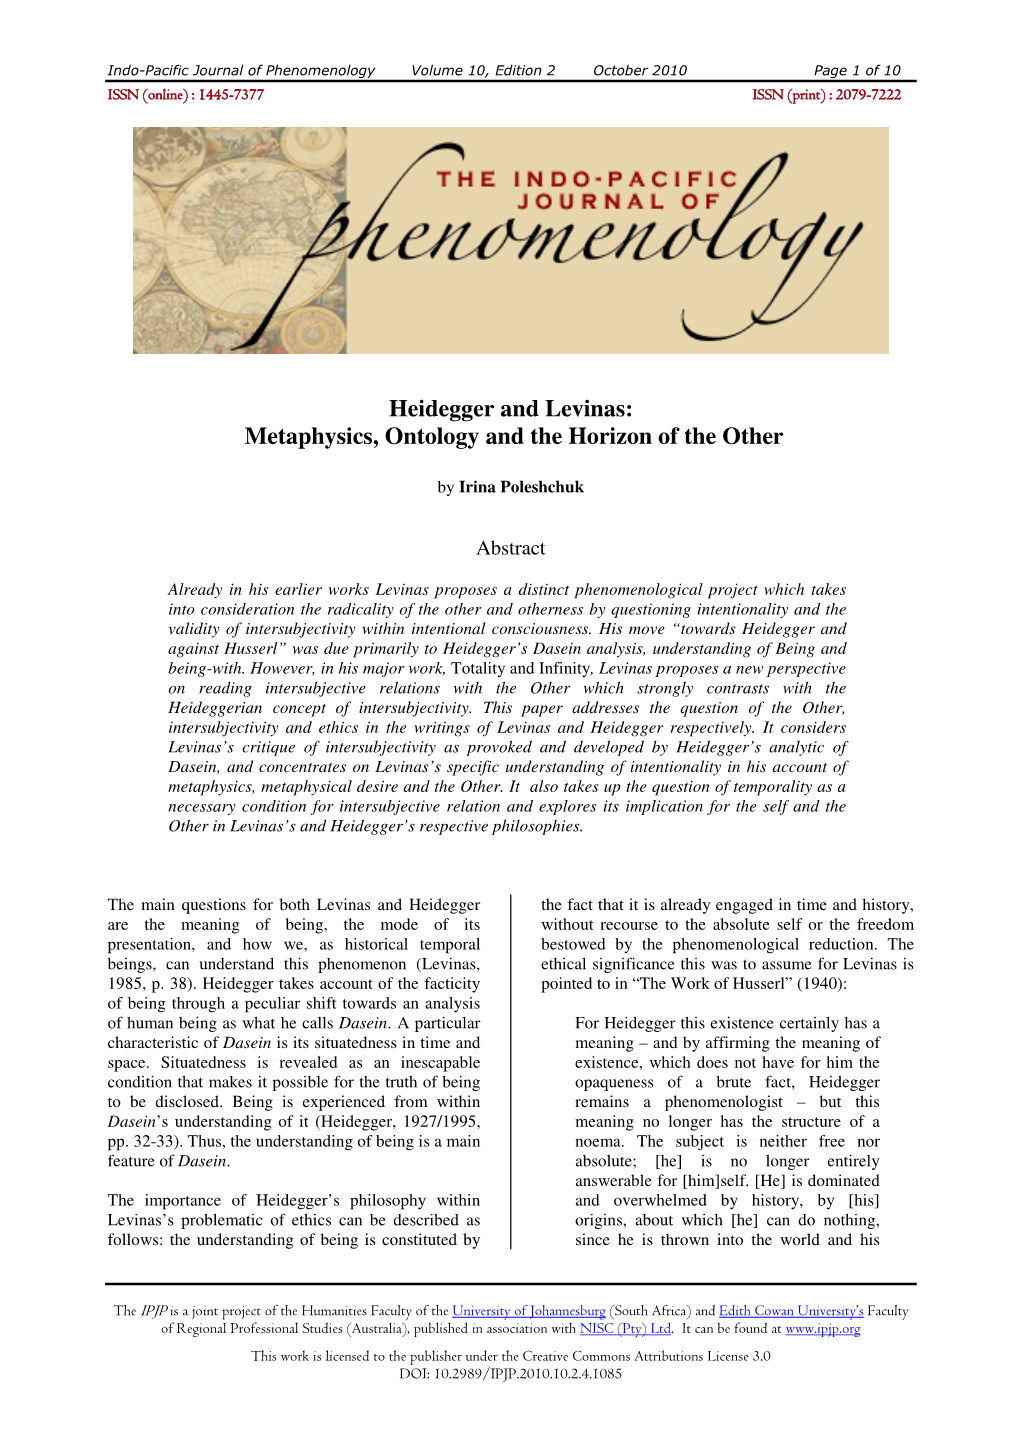 Heidegger and Levinas: Metaphysics, Ontology and the Horizon of the Other